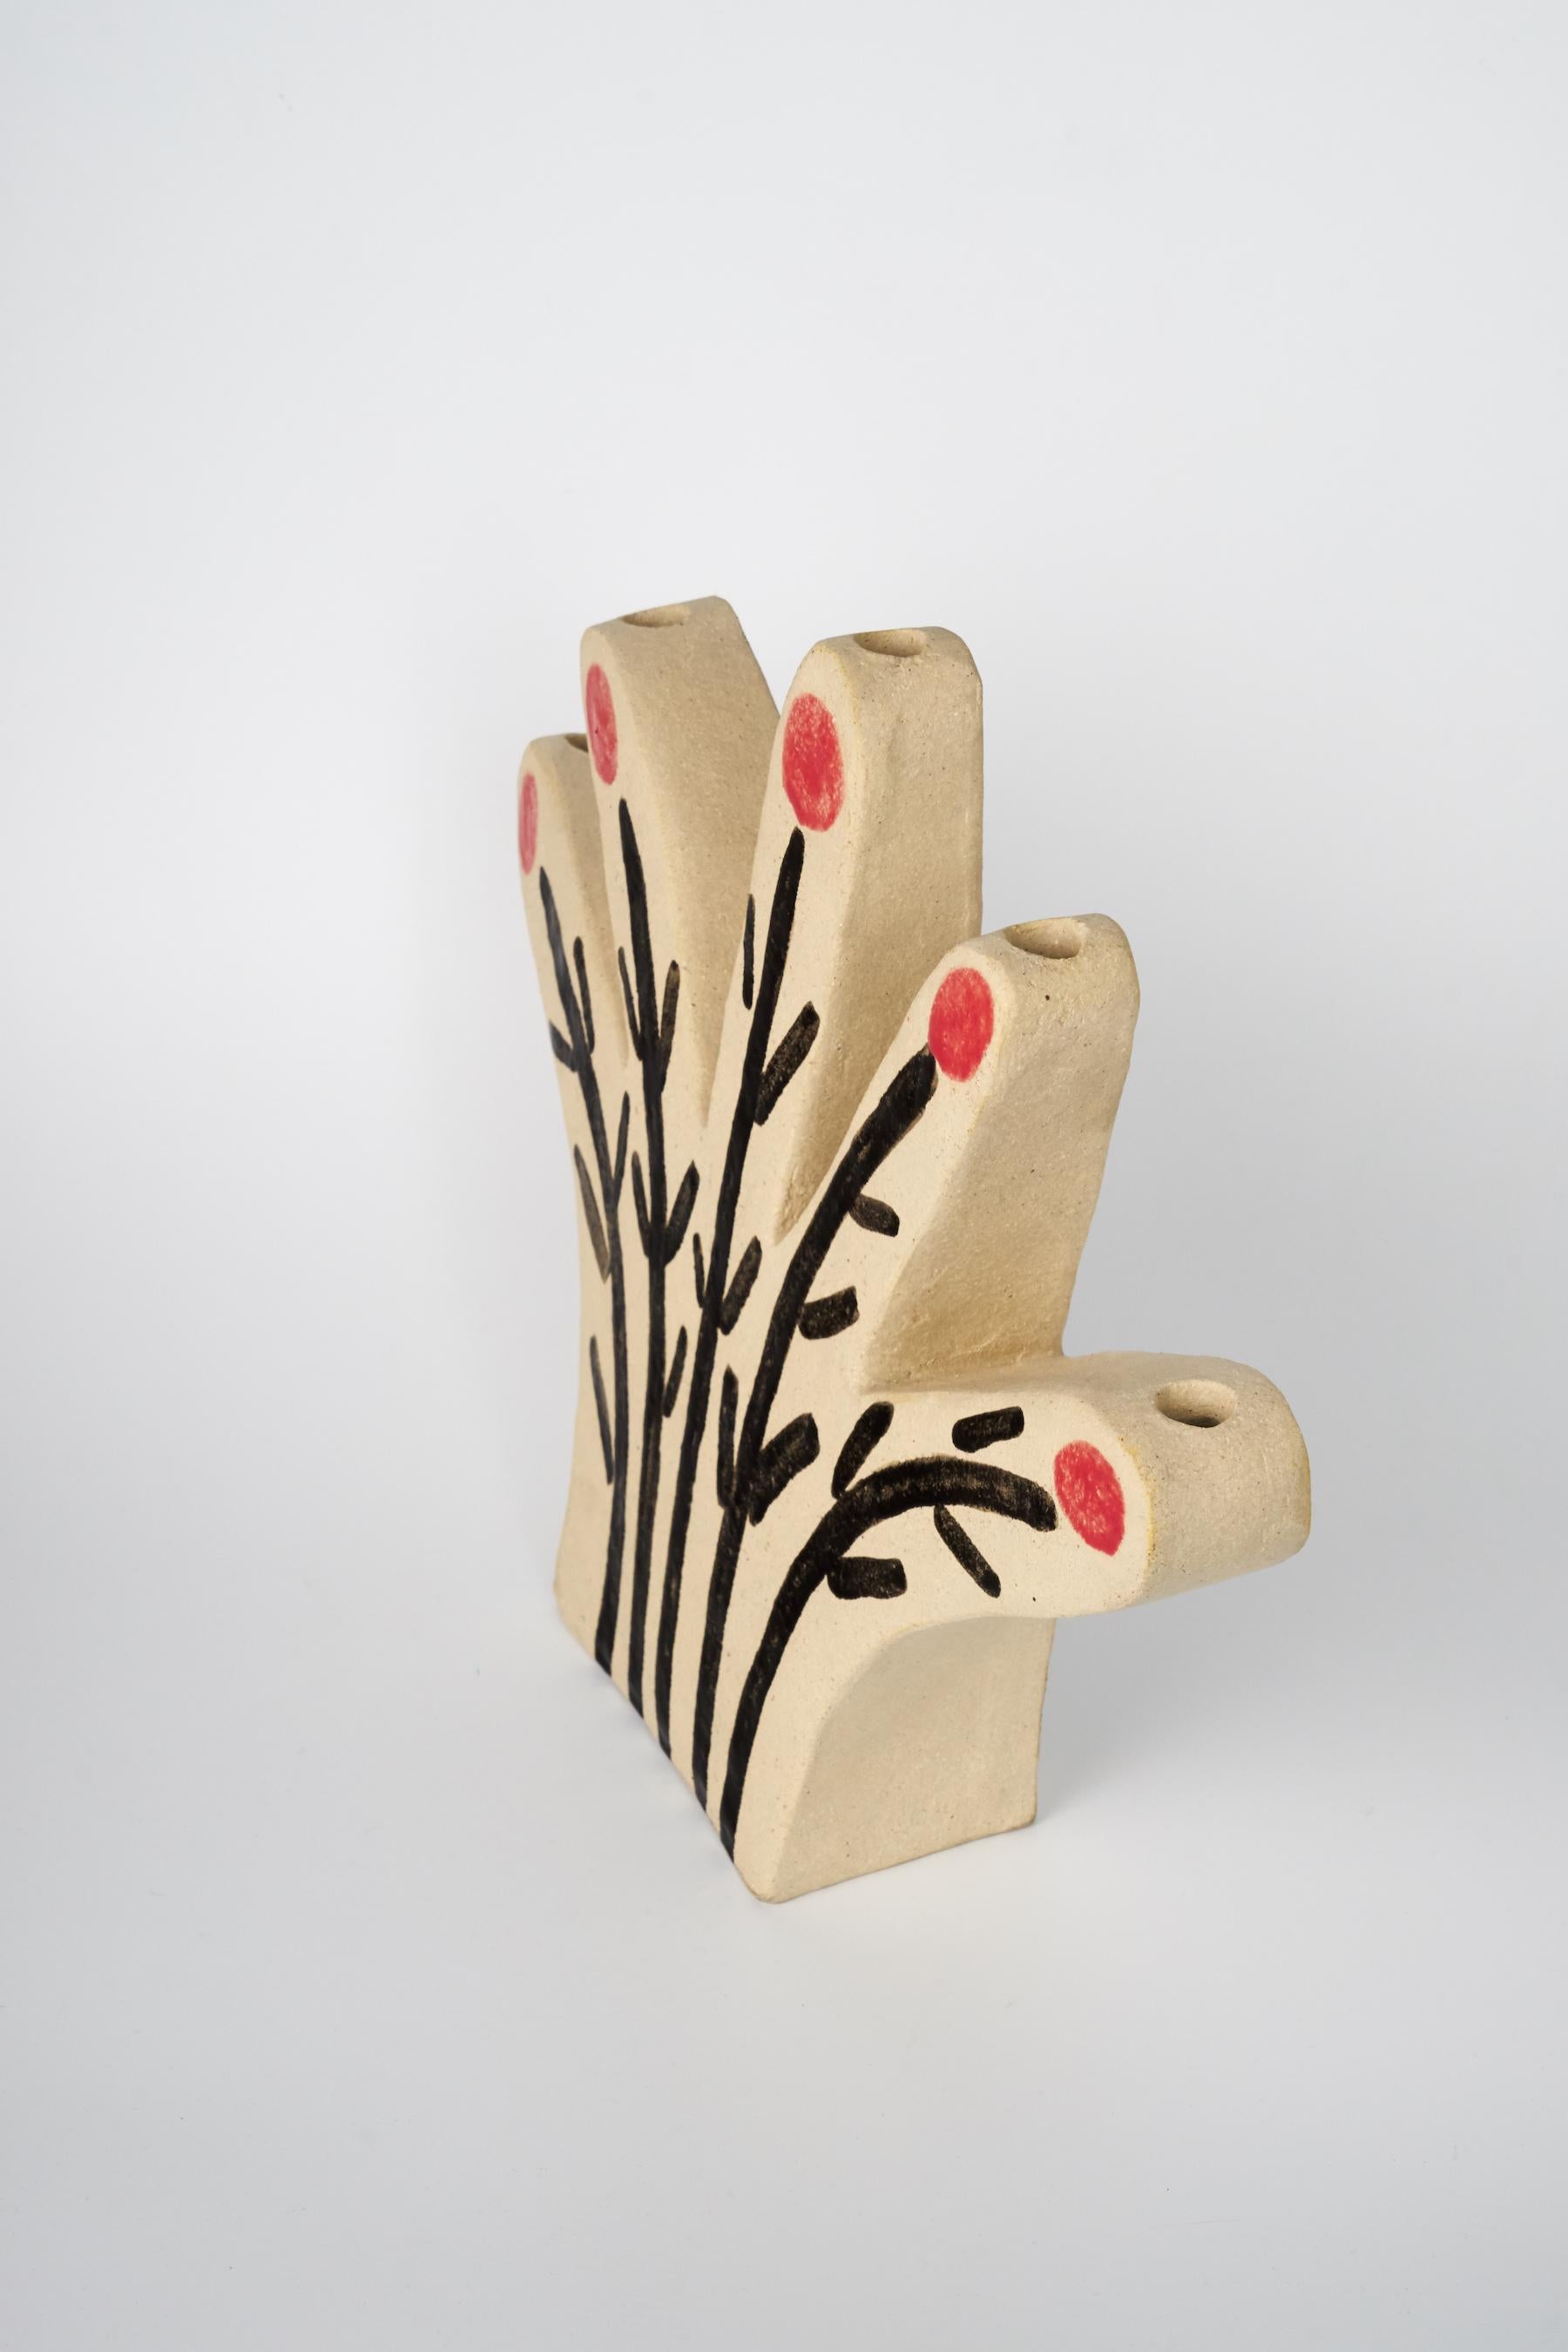 Hand candleholder is a unique hand painted sculpture in the red and black glaze on chamotte clay. Modelled, partially glazed. Numbered by the artist at the bottom. It can be used as a candleholder or a vase.
 